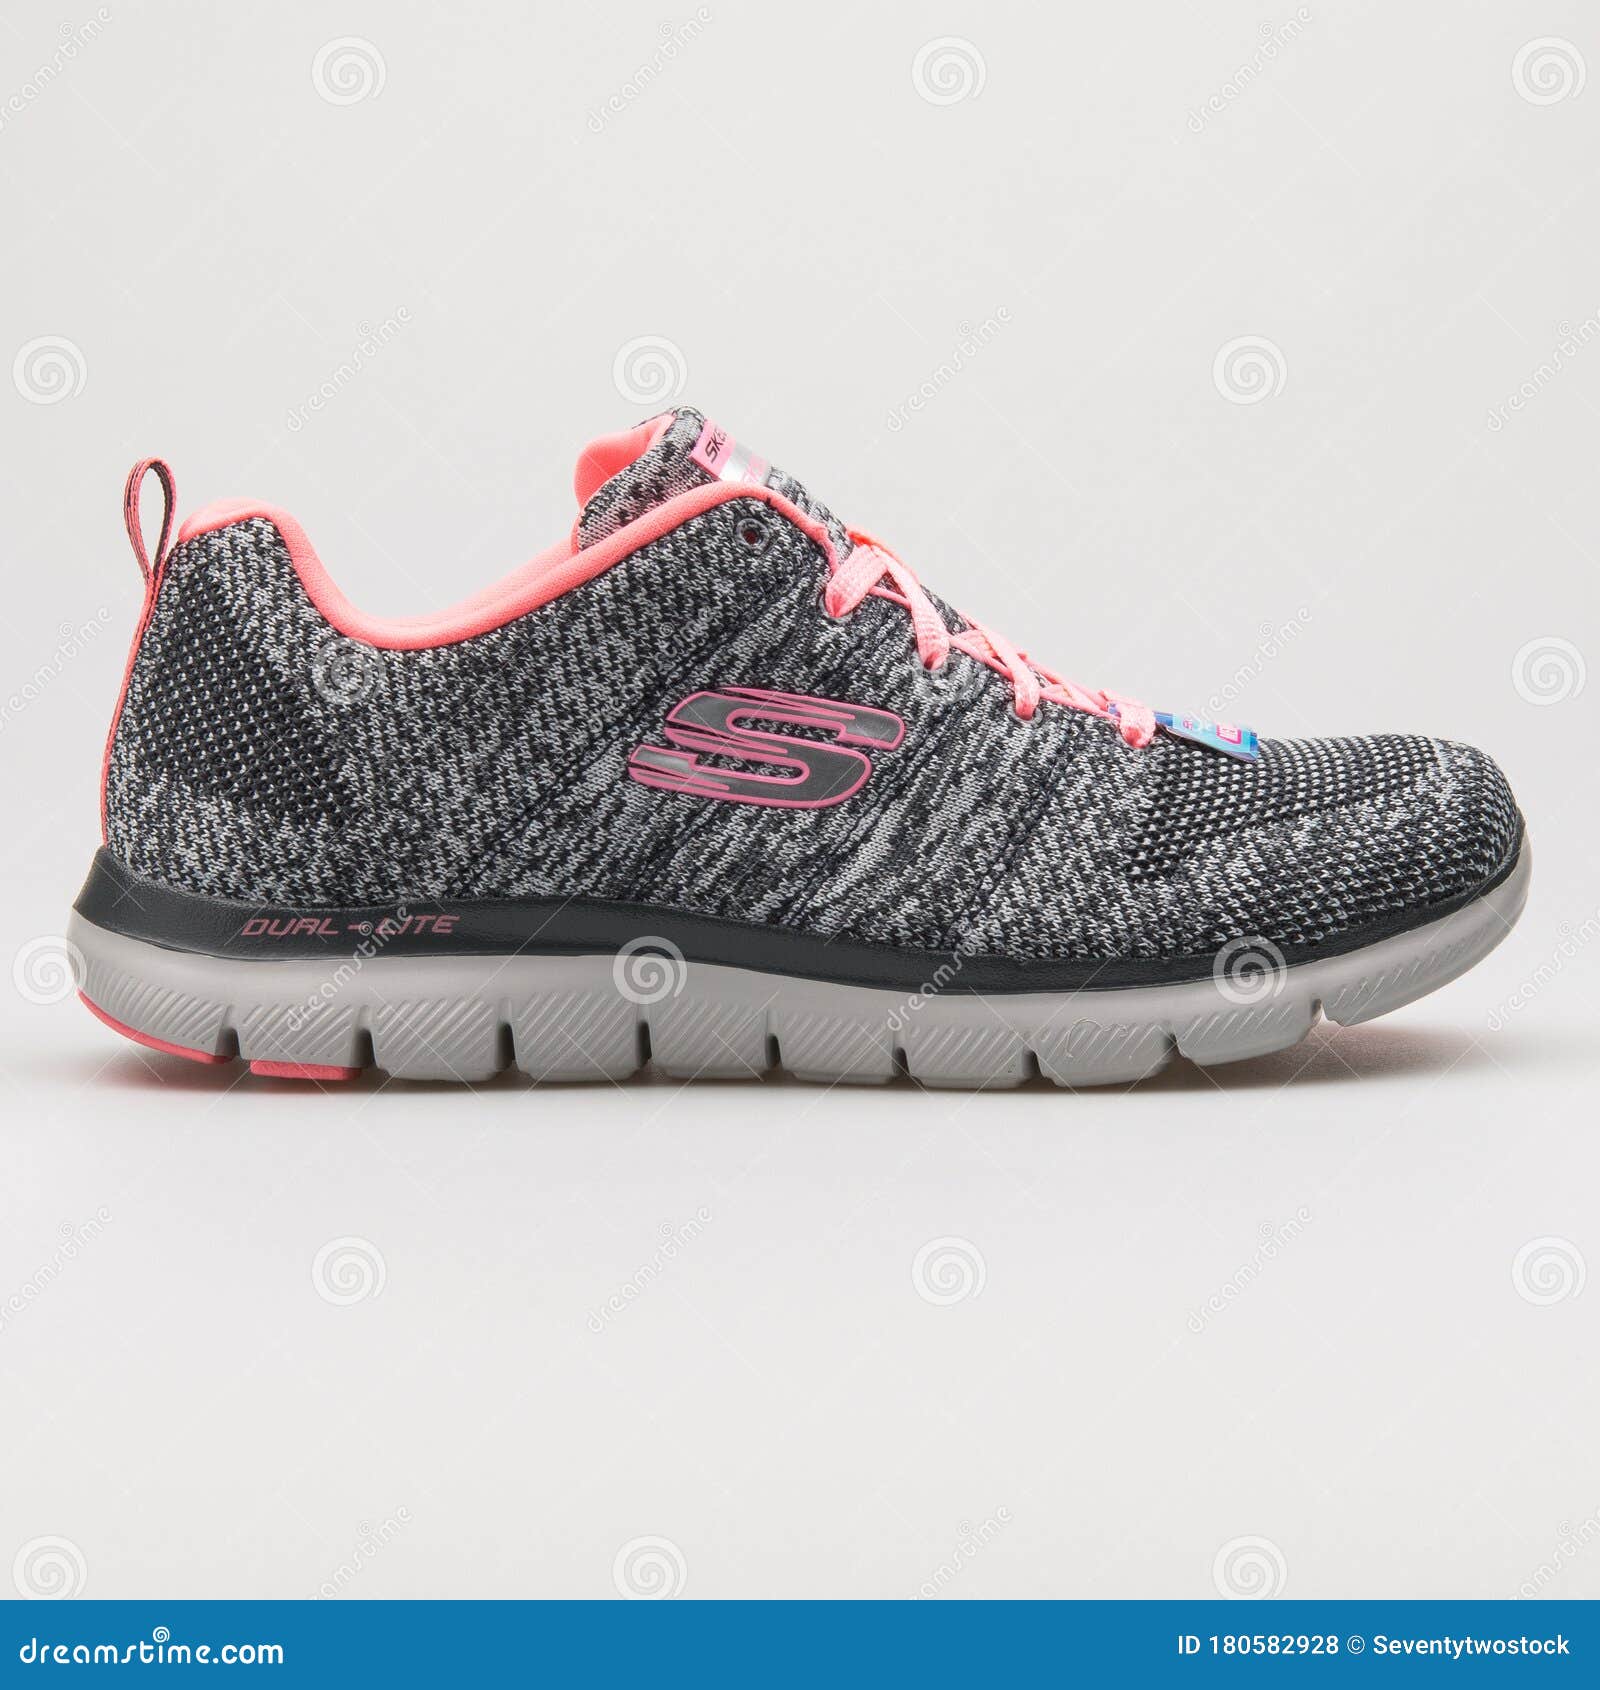 Skechers Flex Appeal 2.0 High Energy and Pink Sneaker Editorial Stock Photo - Image of flex, laces: 180582928